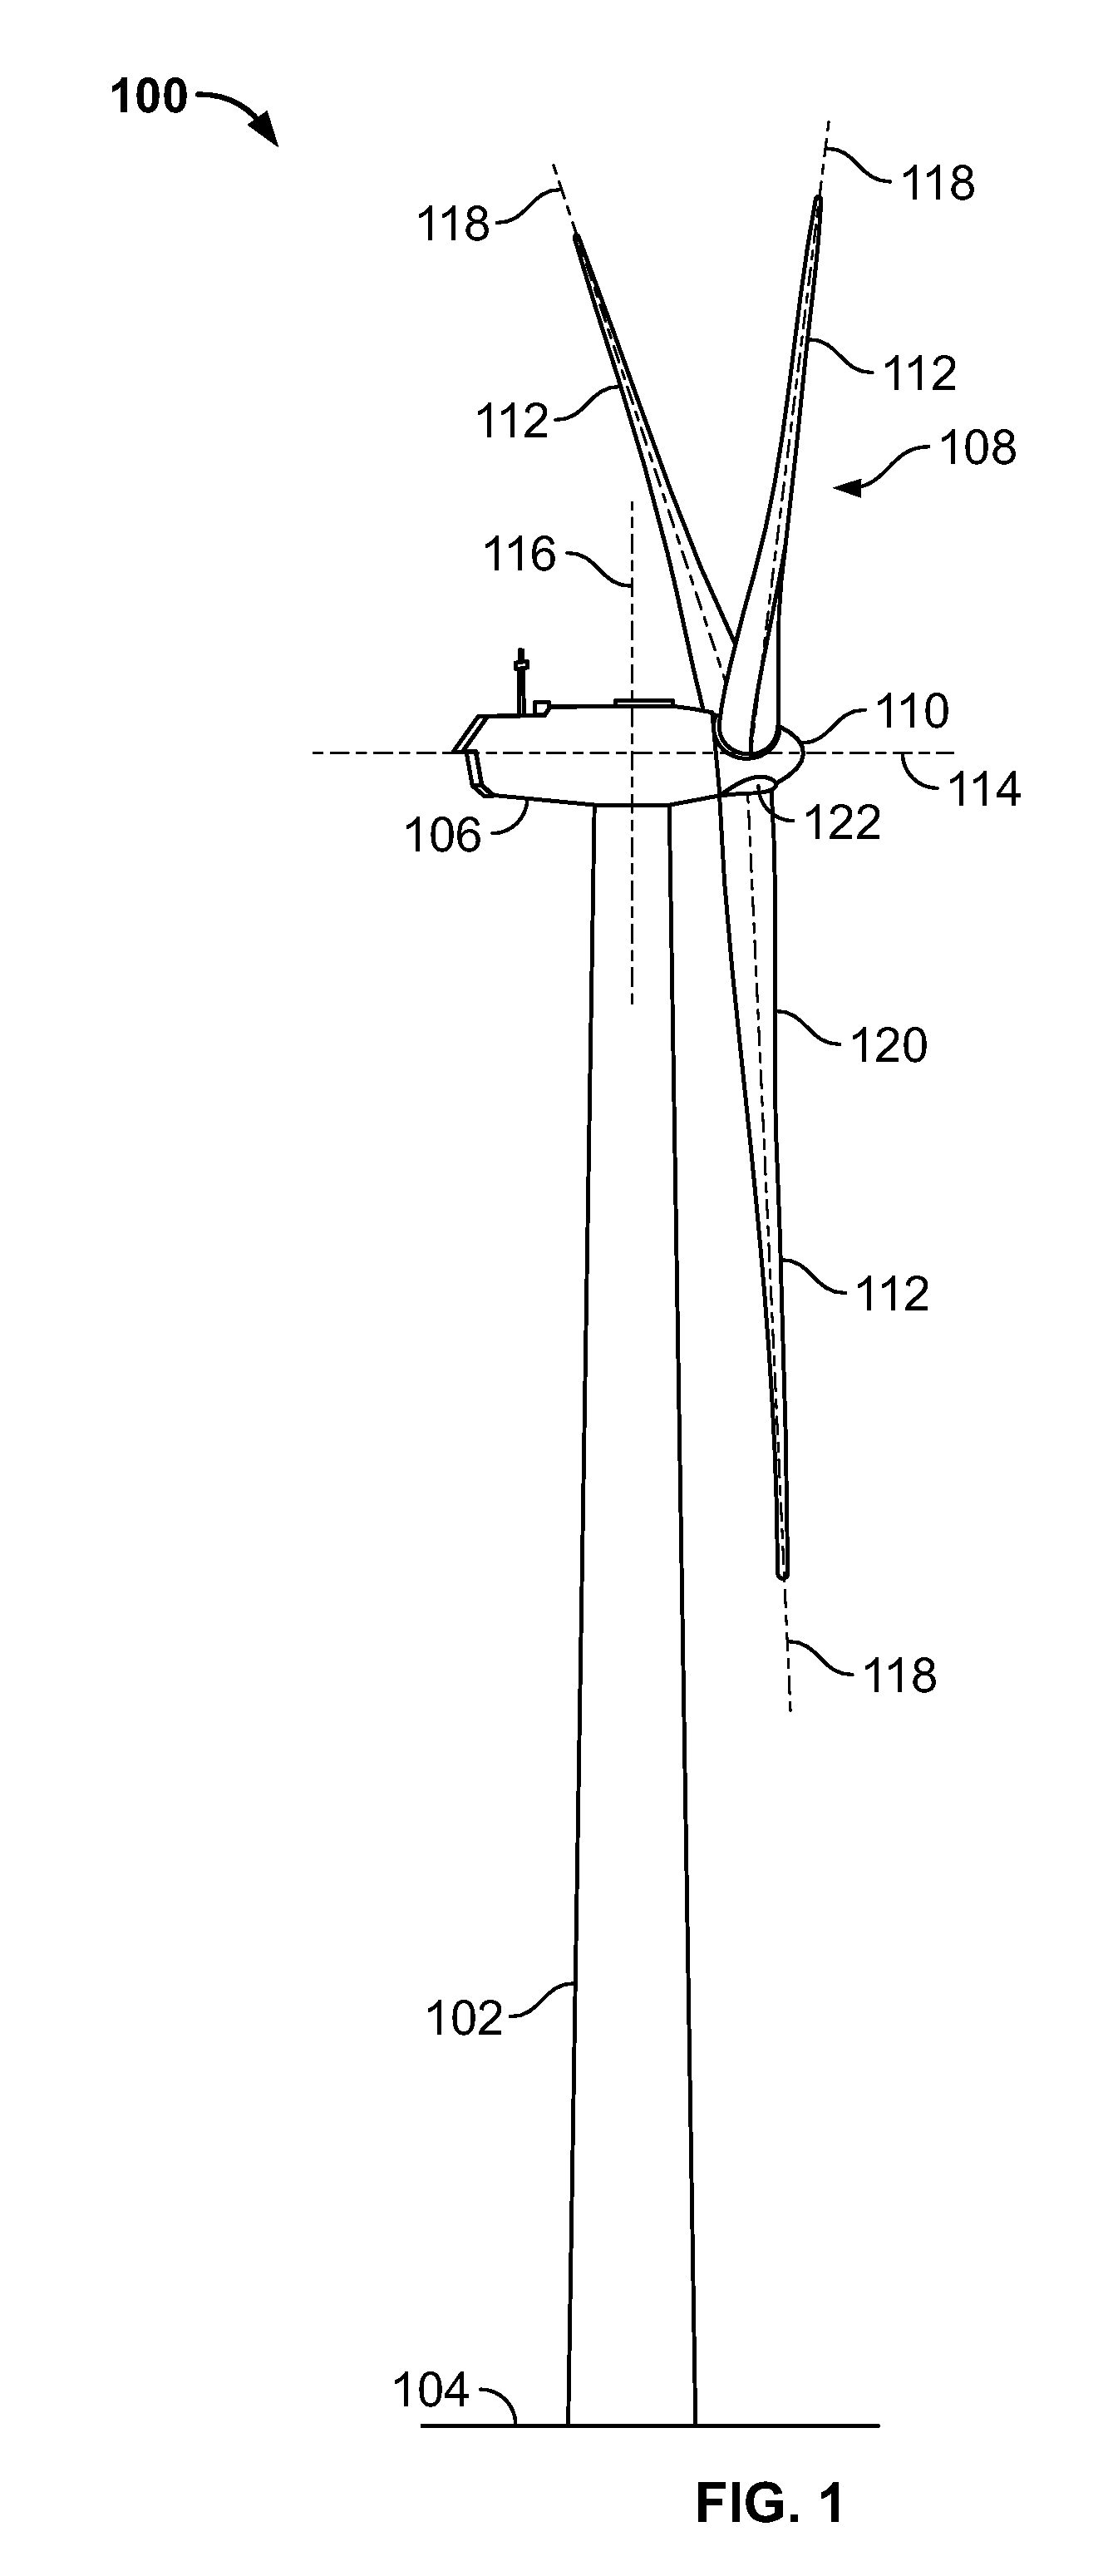 Methods and apparatus for assembling and operating semi-monocoque rotary machines